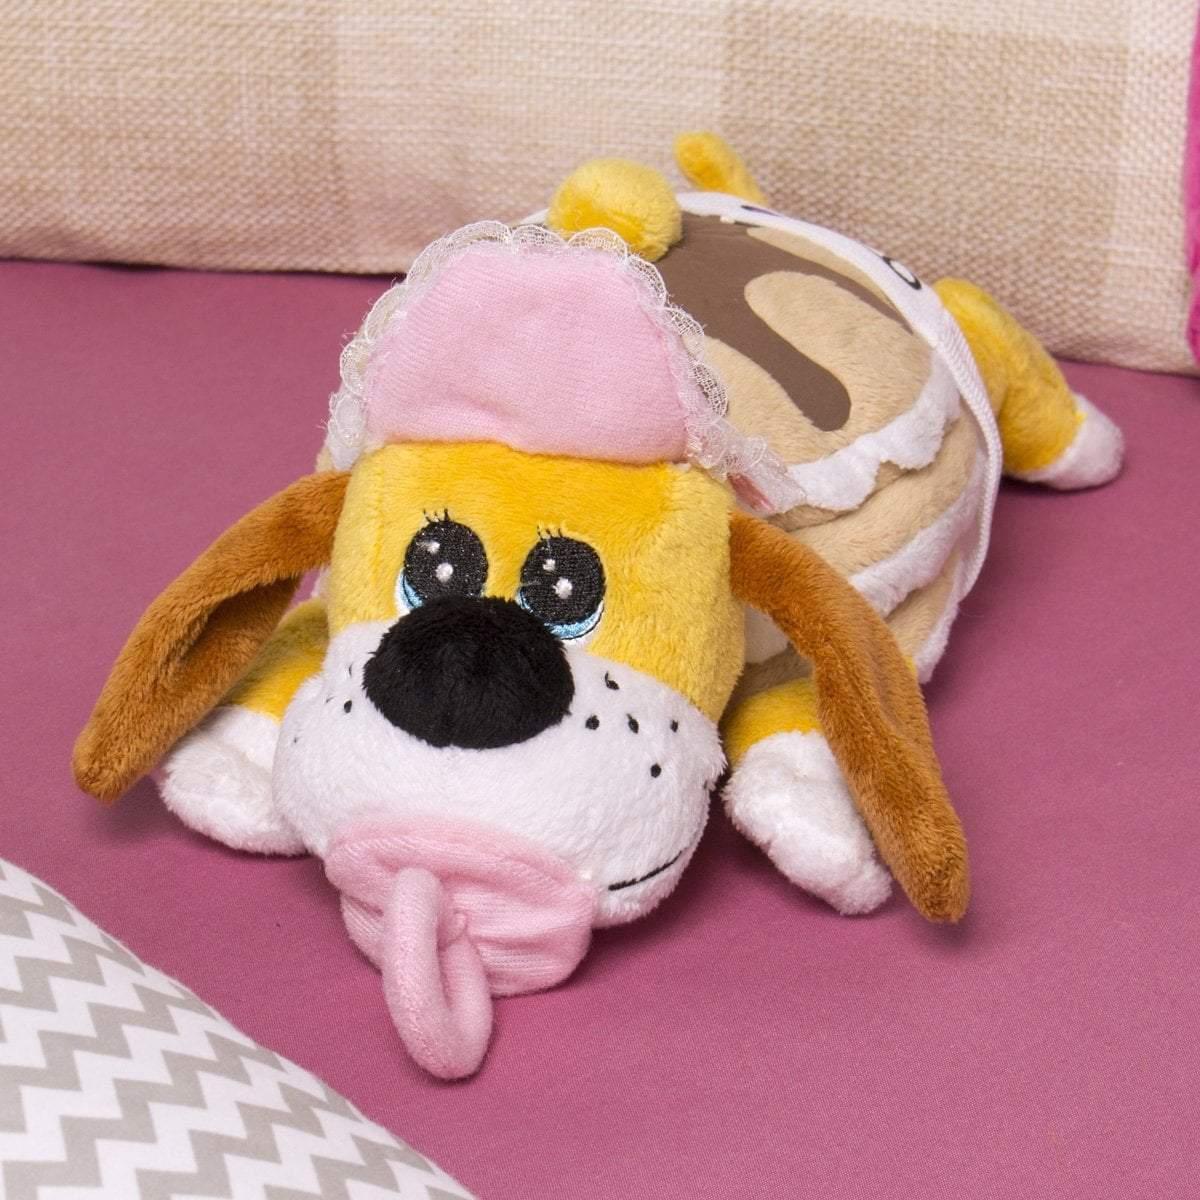 "Maple" the 11in Baby Cakes Girl Pup Plush by The CuddleCakes Group